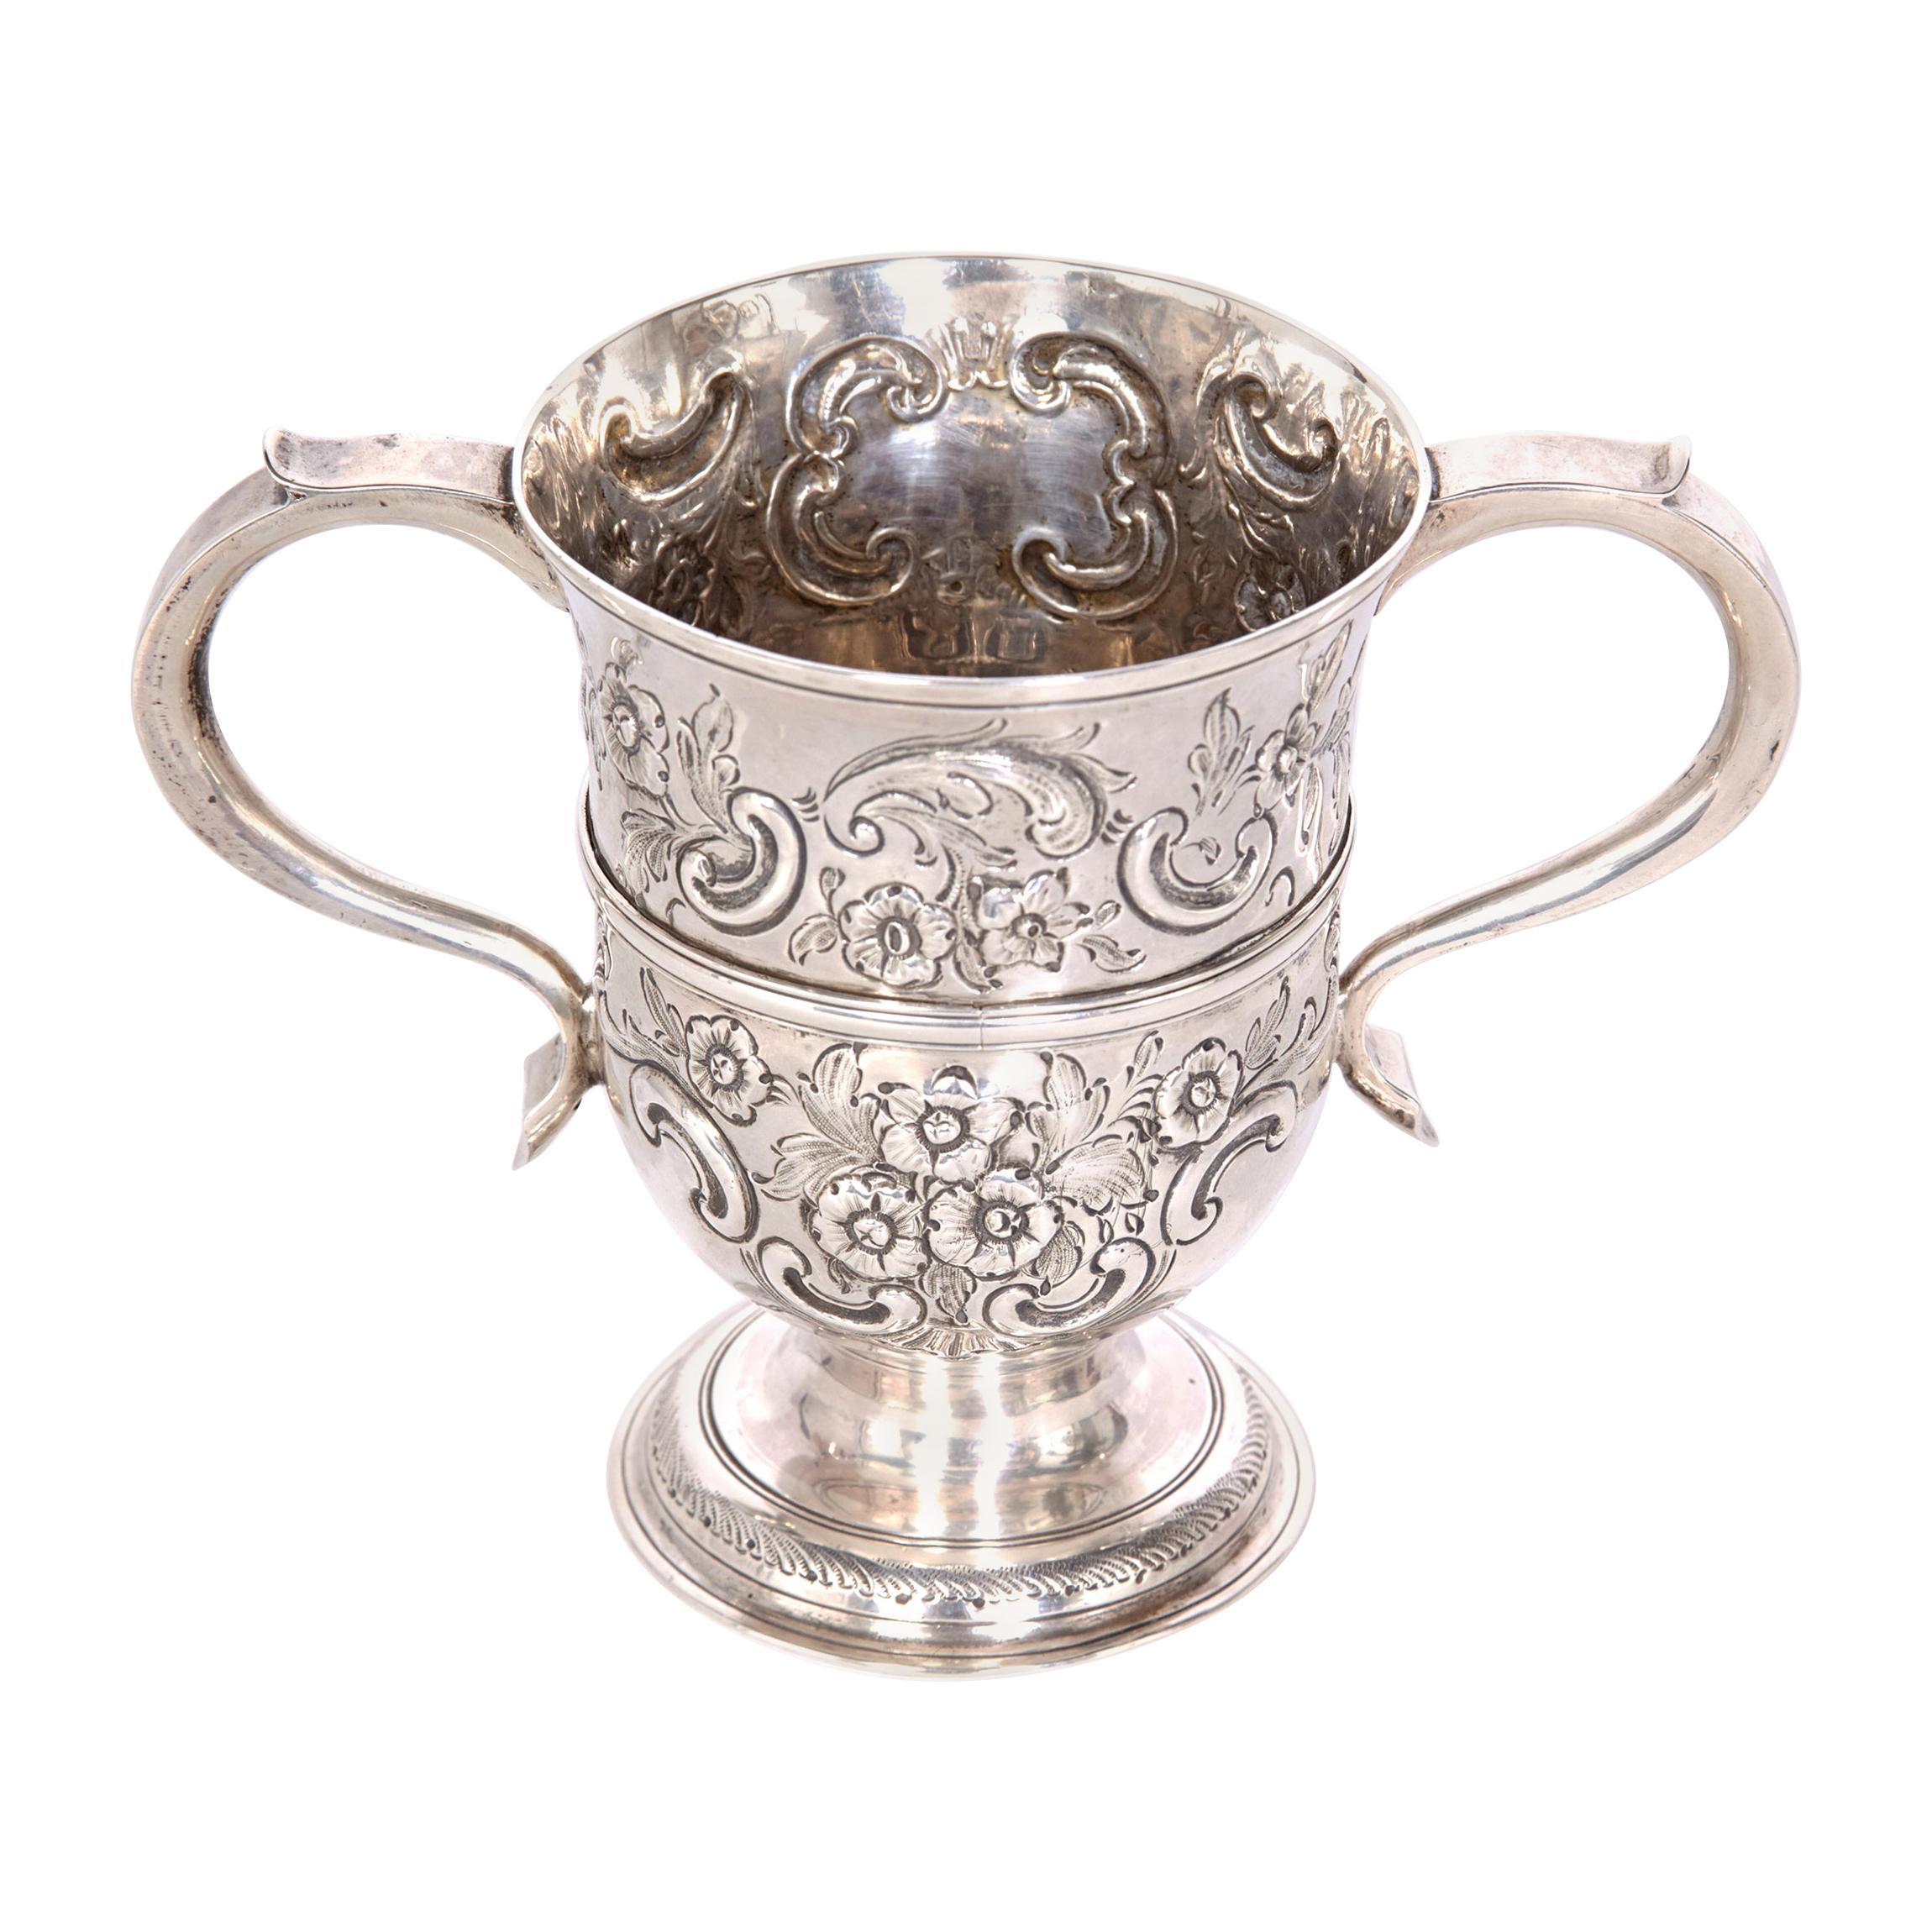 Sterling Silver 2-Handled Loving Cup 1762, London by Thomas Whipham